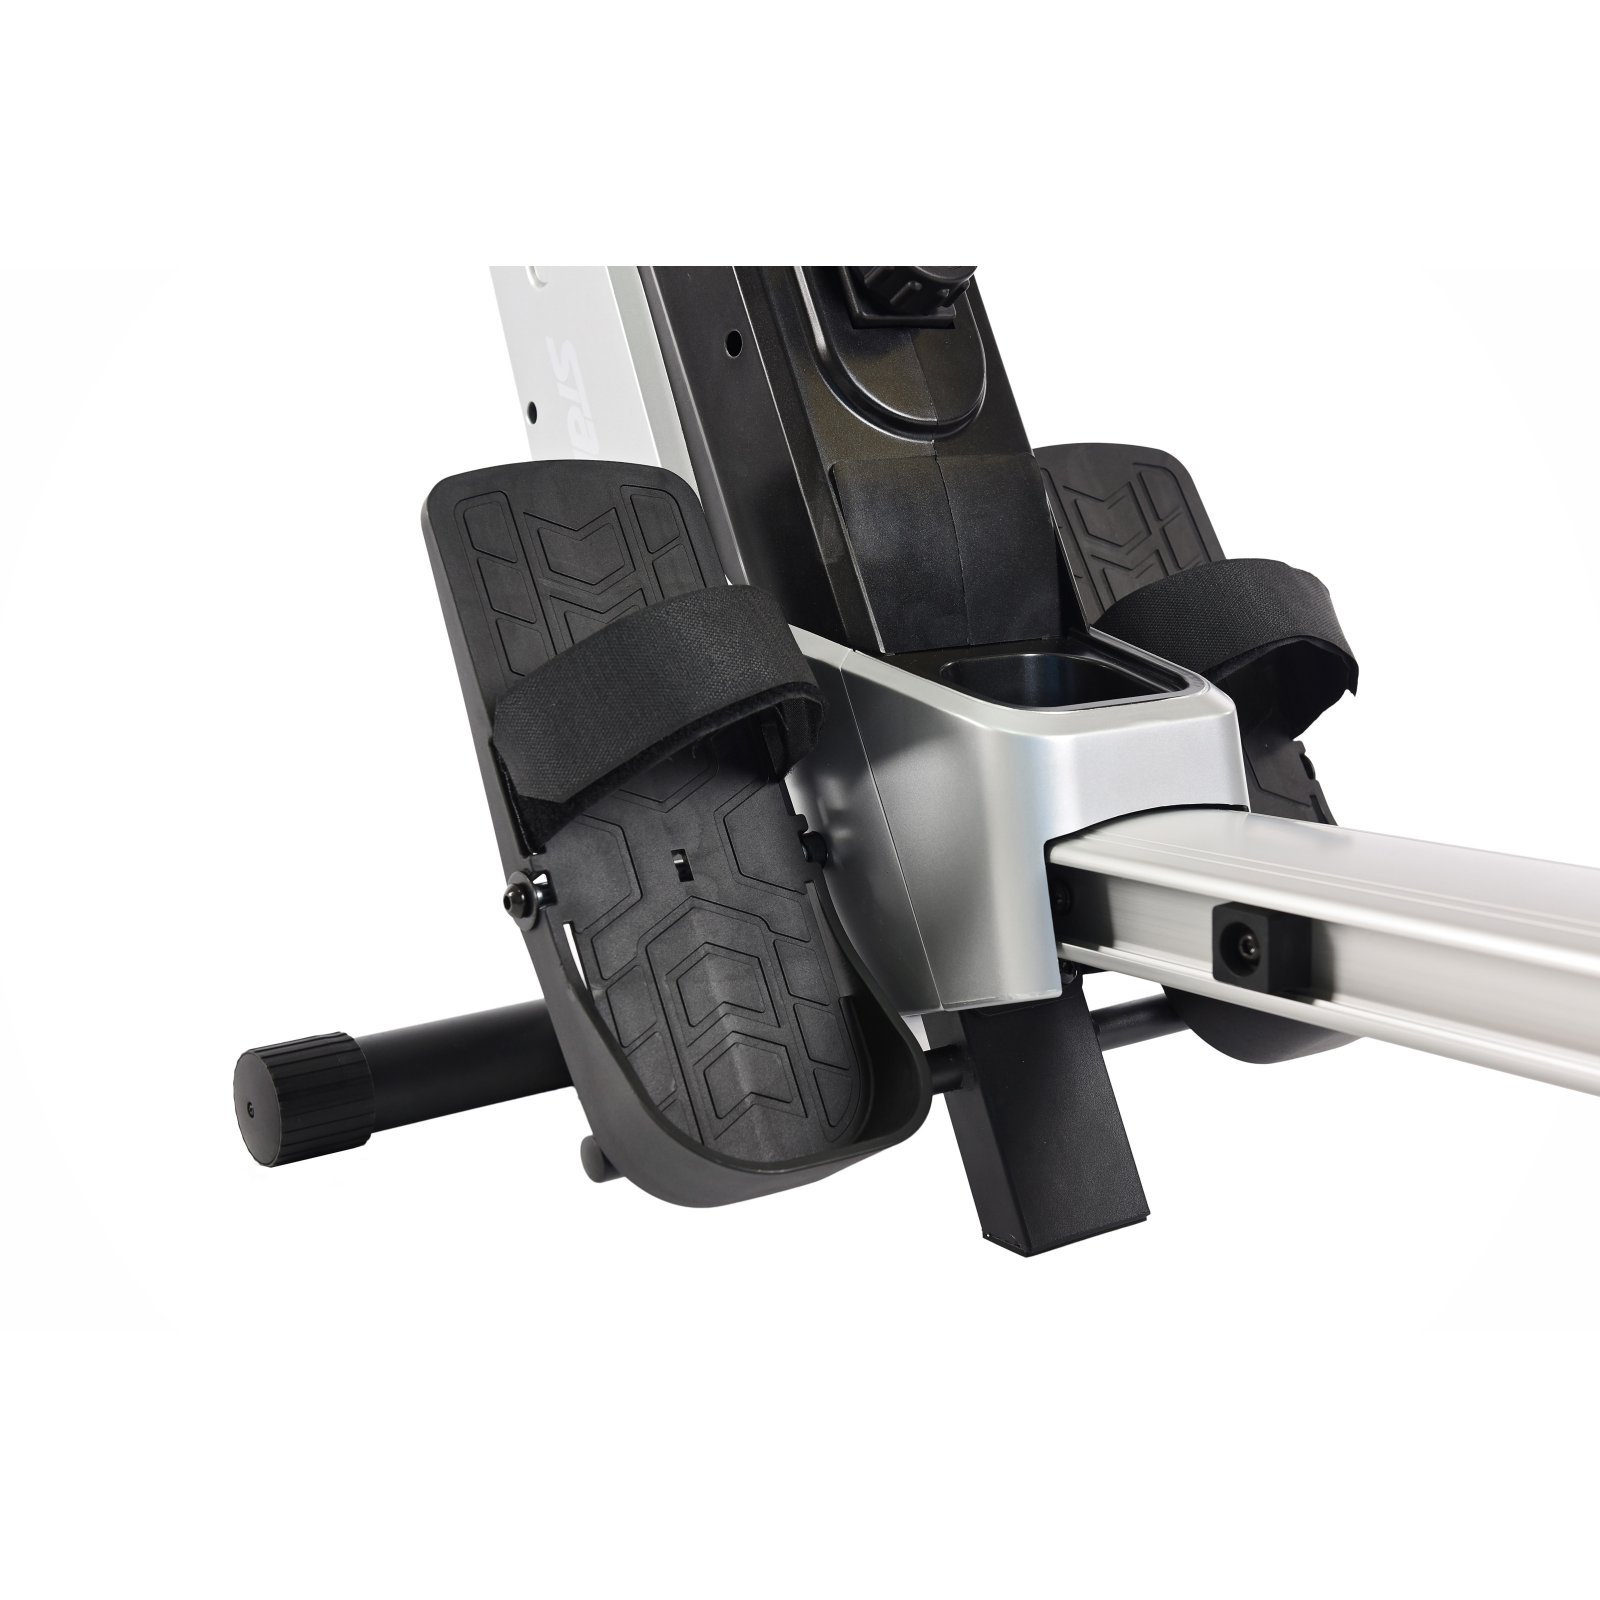 Stamina Products Multi-Level Magnetic Resistance Compact Rowing Machine - image 5 of 11